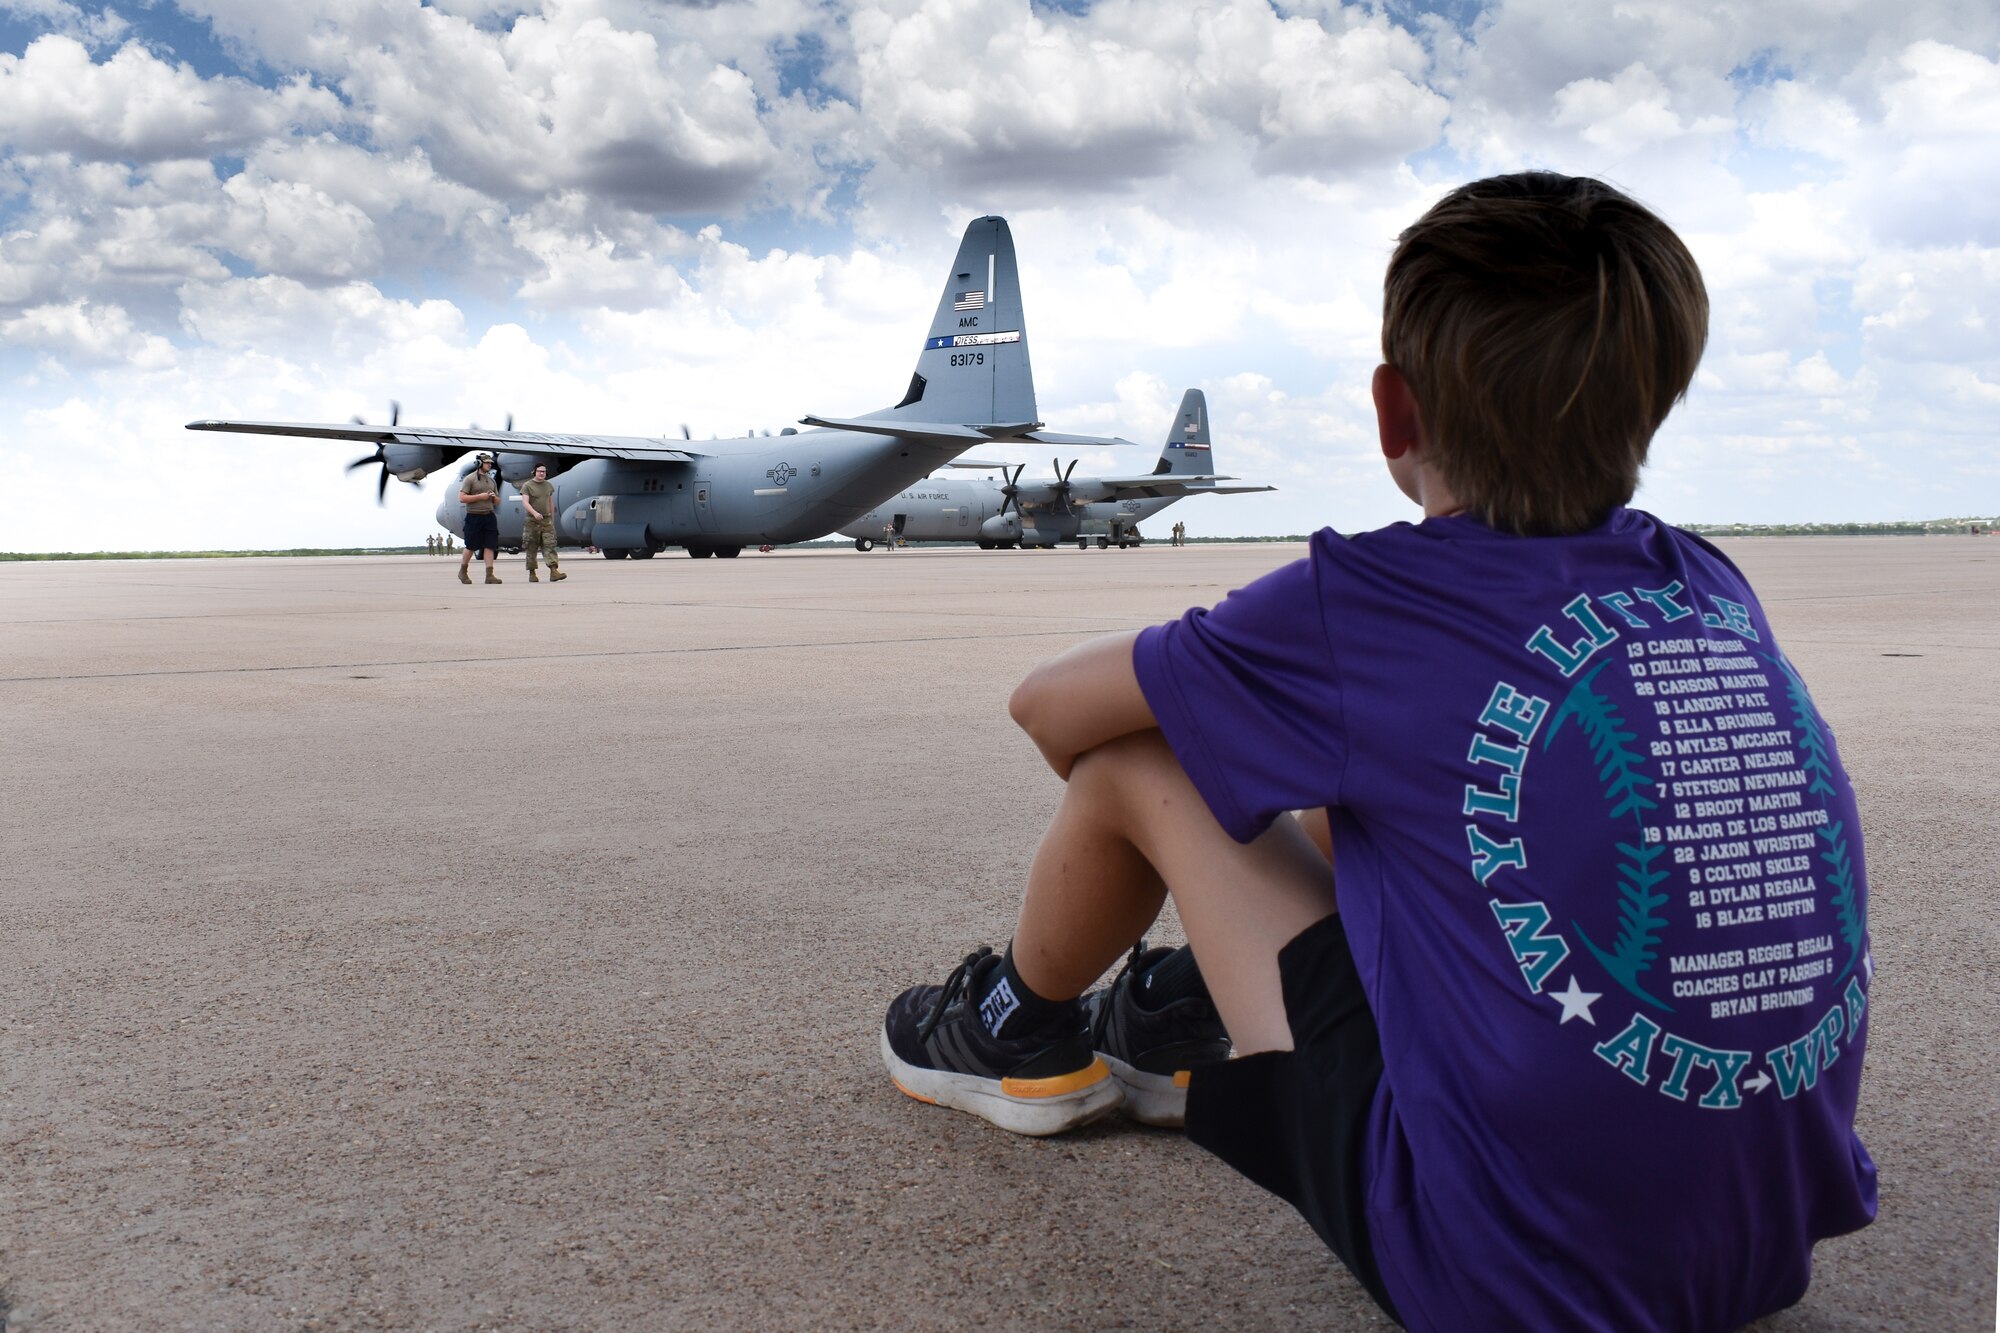 A member of the Wylie Little League Baseball team watches C-130 maintainers taxi aircraft while on a tour of Dyess Aug. 26, 2022. The C-130 unit’s deployment to U.S. Central Command taskings marks the first implementation of the Air Force Generation model in Air Mobility Command. (U.S. Air Force photo by 1st Lt. Kaitlin Cashin)